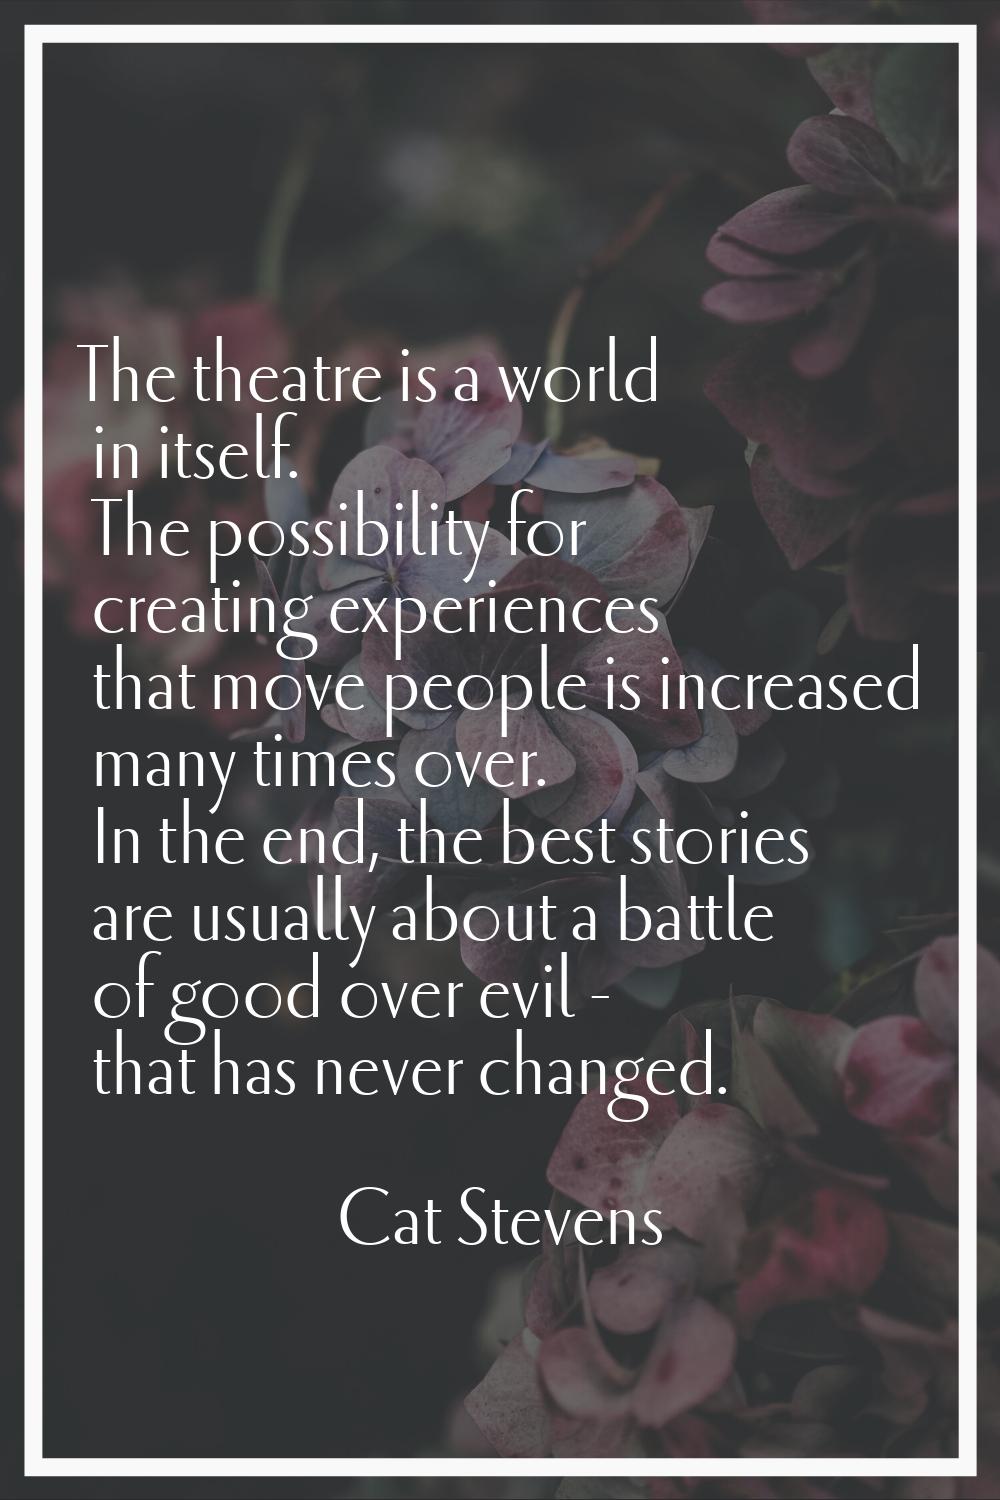 The theatre is a world in itself. The possibility for creating experiences that move people is incr